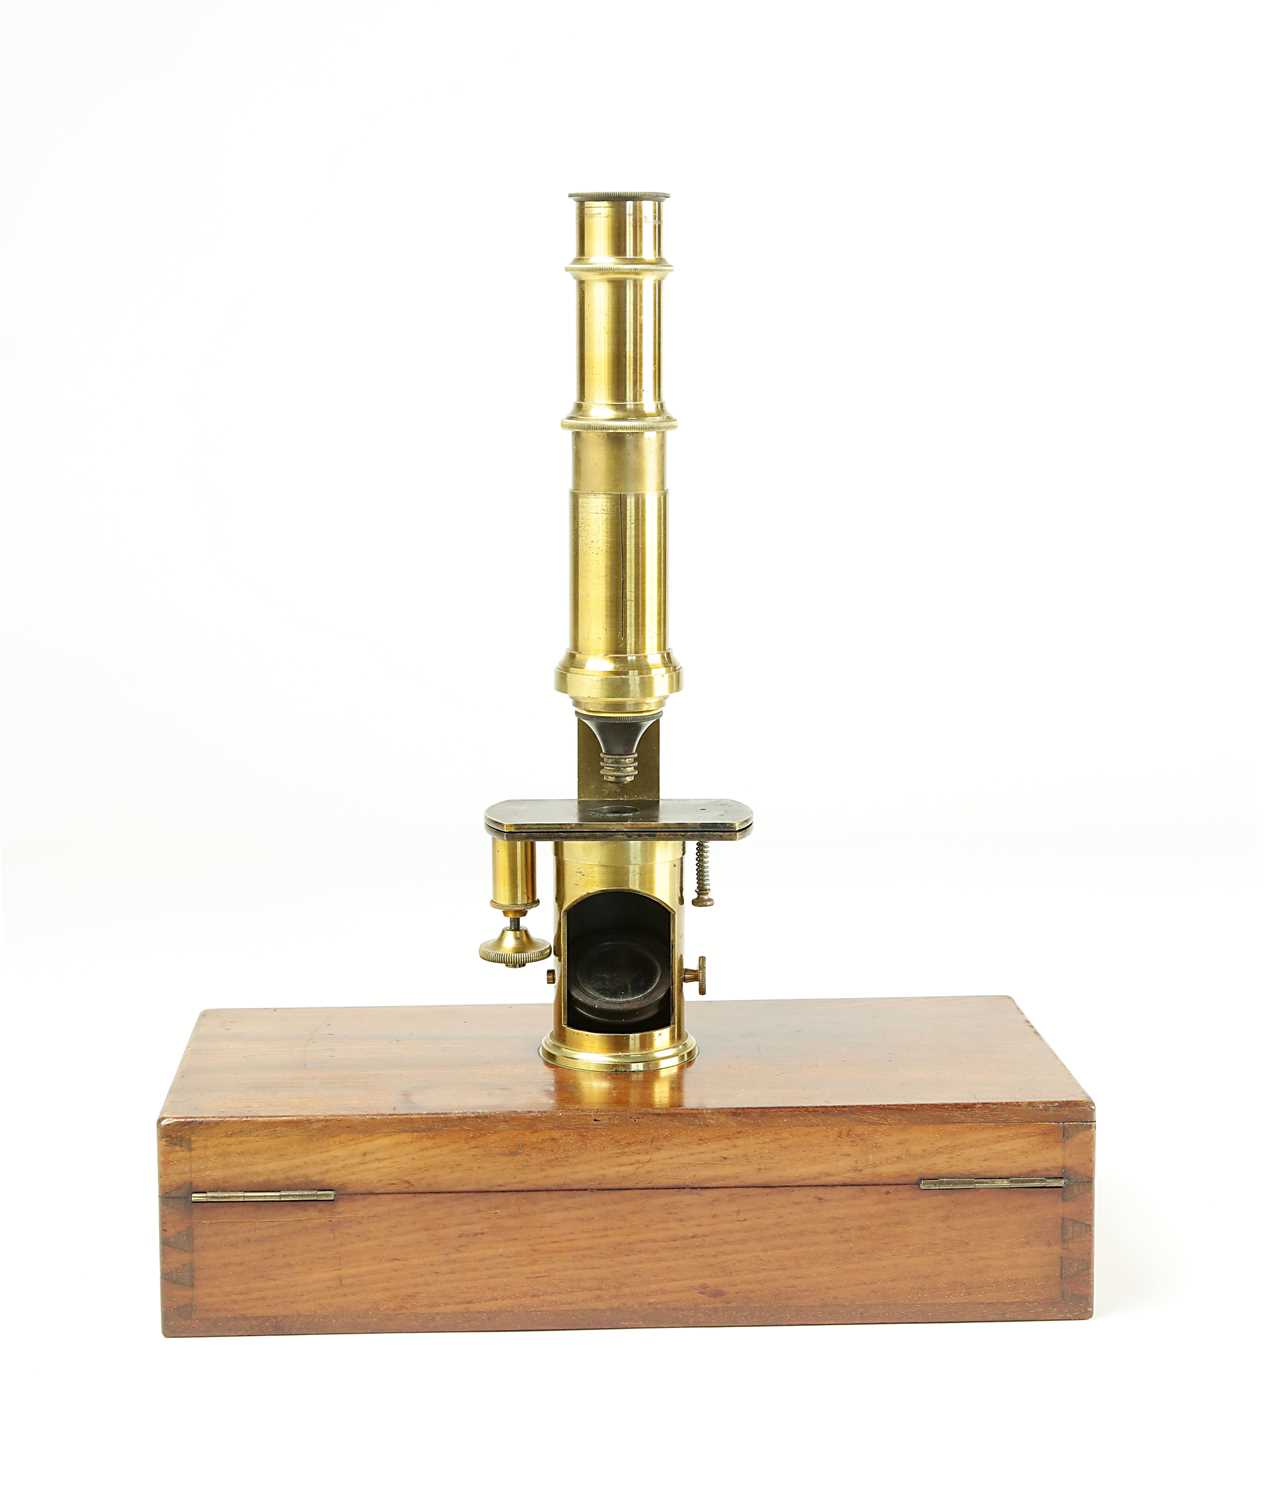 94 - A Very Rare Signed Drum Microscope, by Pierre Ambroise Richebourg (1810-1873)